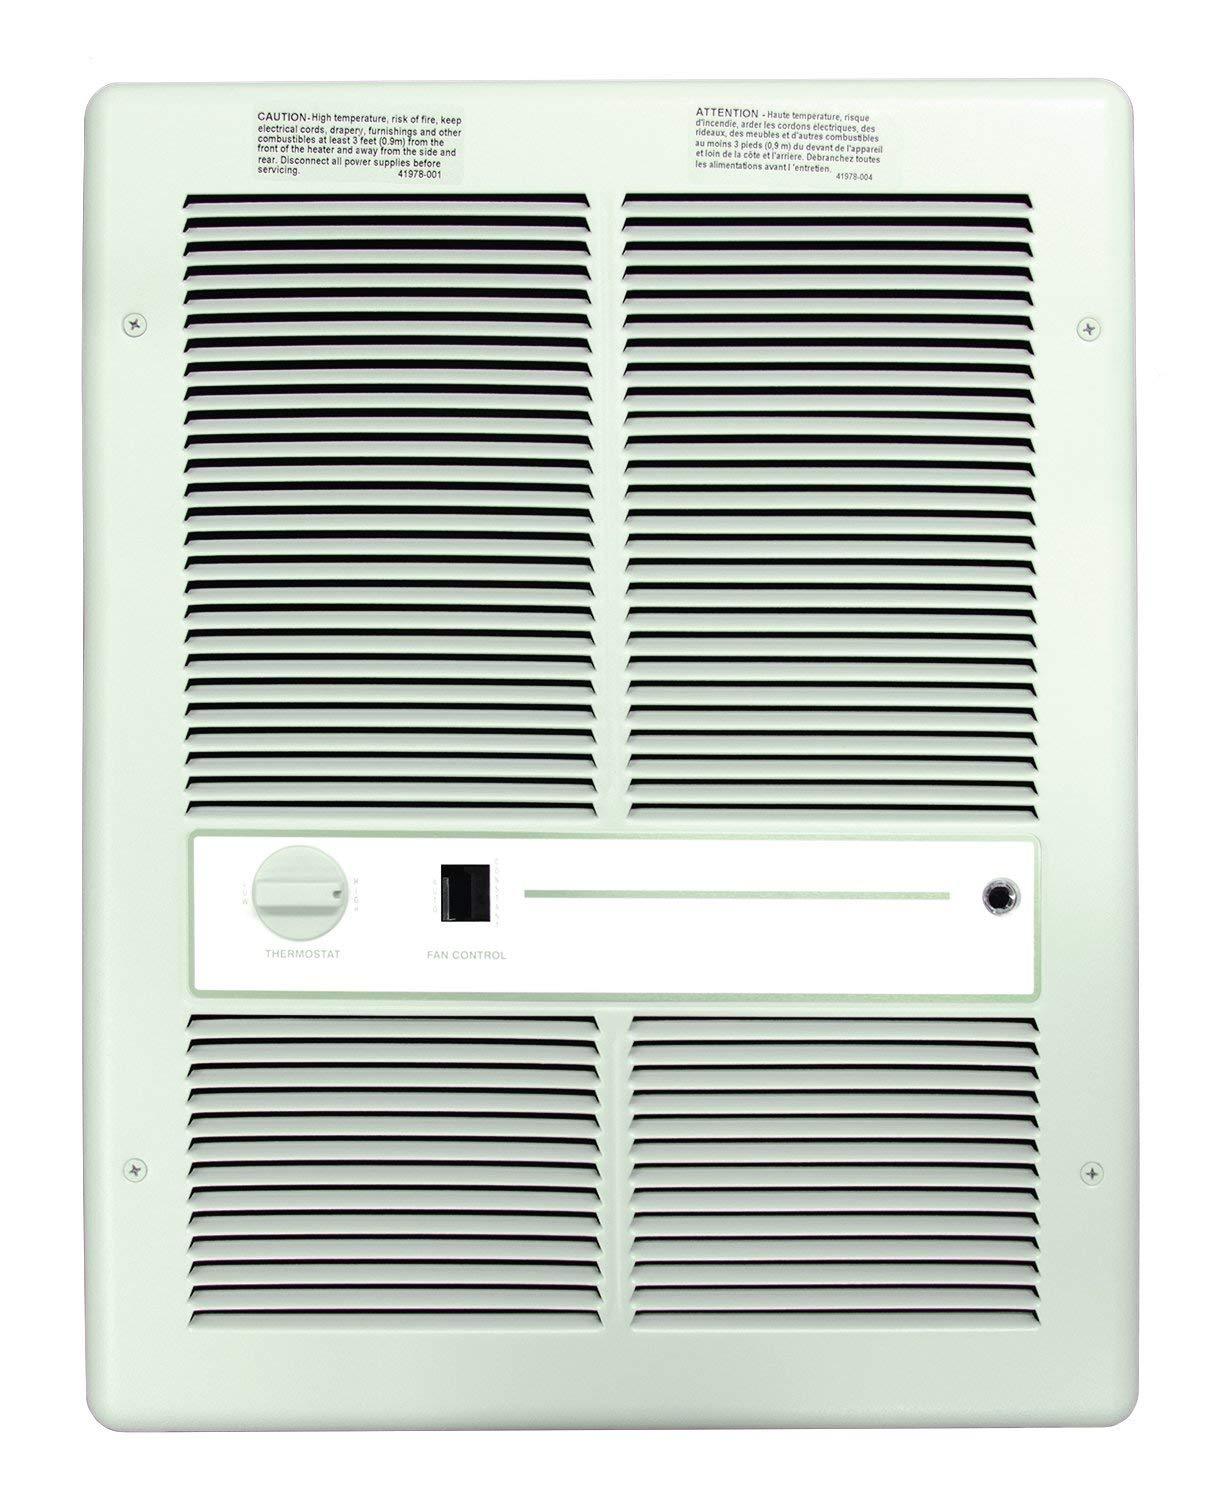 TPI 1000W 120V 3310 Series Fan Forced Wall Heater (White) - With Summer Fan Switch - 2 Pole Thermostat - E3312T2SRPW